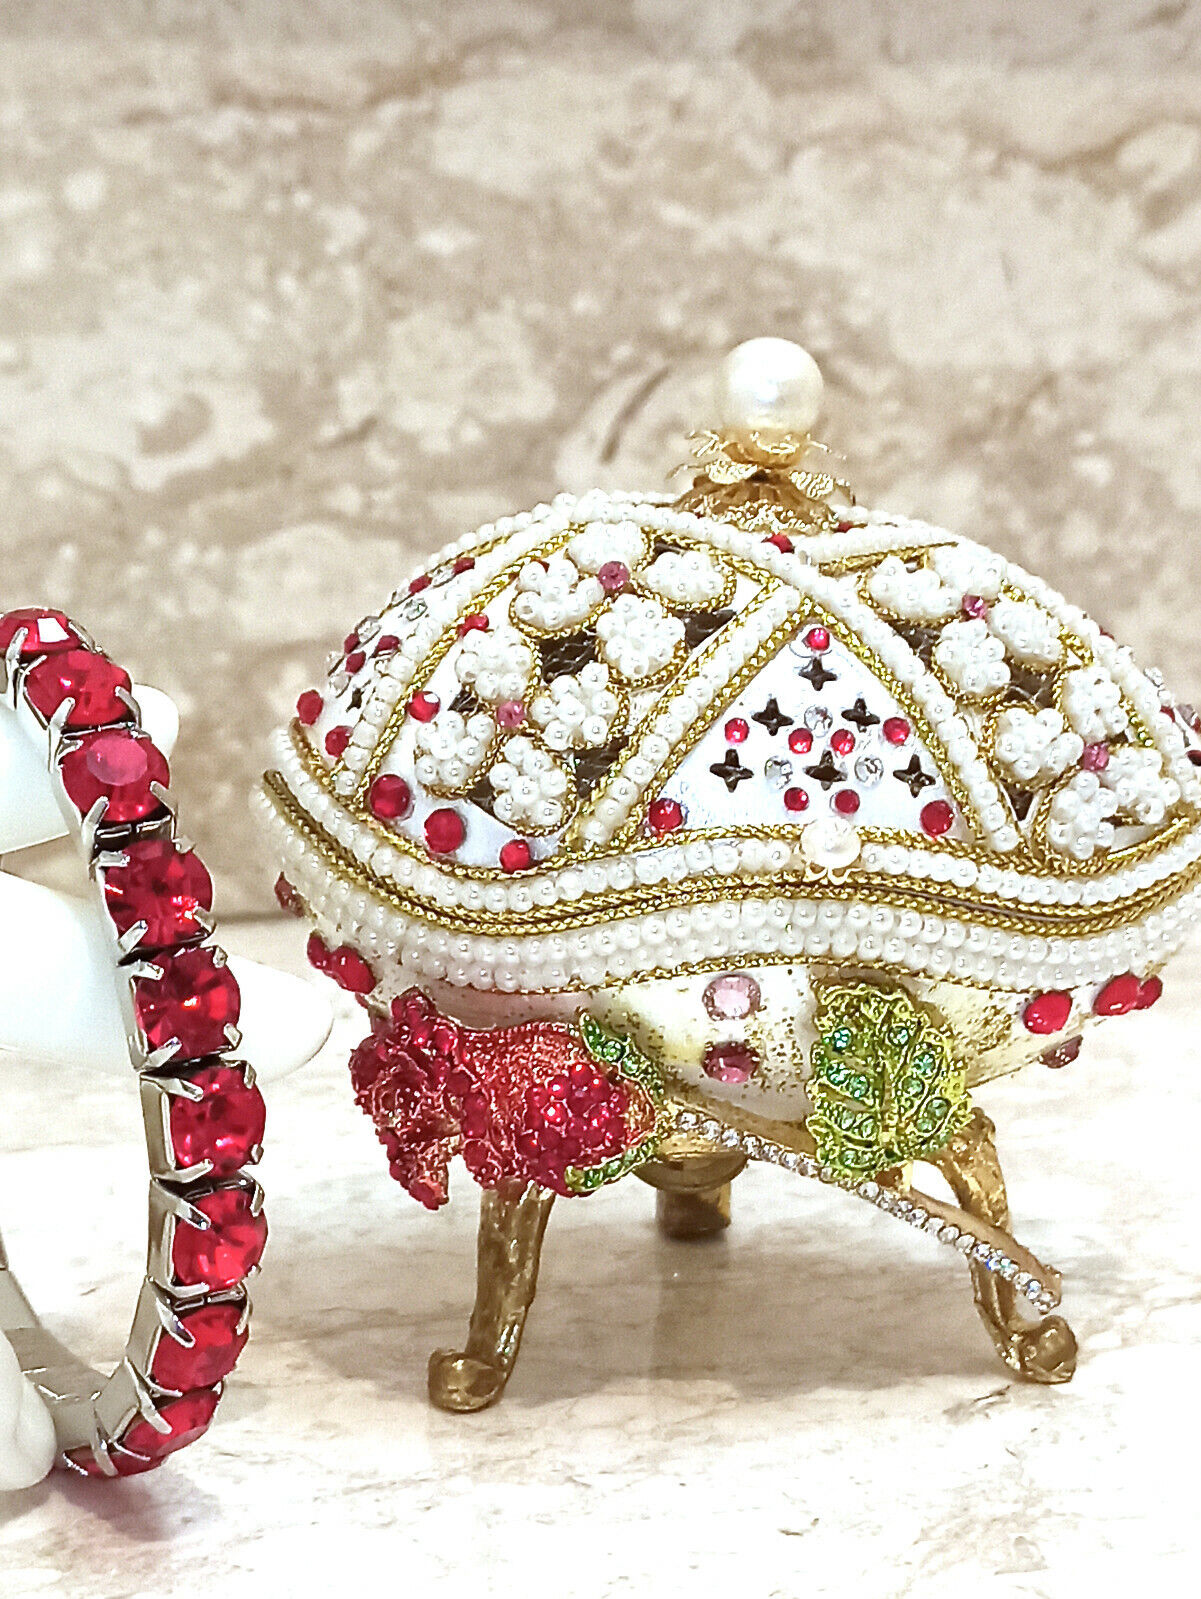 XMAS gift for girlfriend birthday gift Faberge egg Music box Jewelry 24k GOLD HM